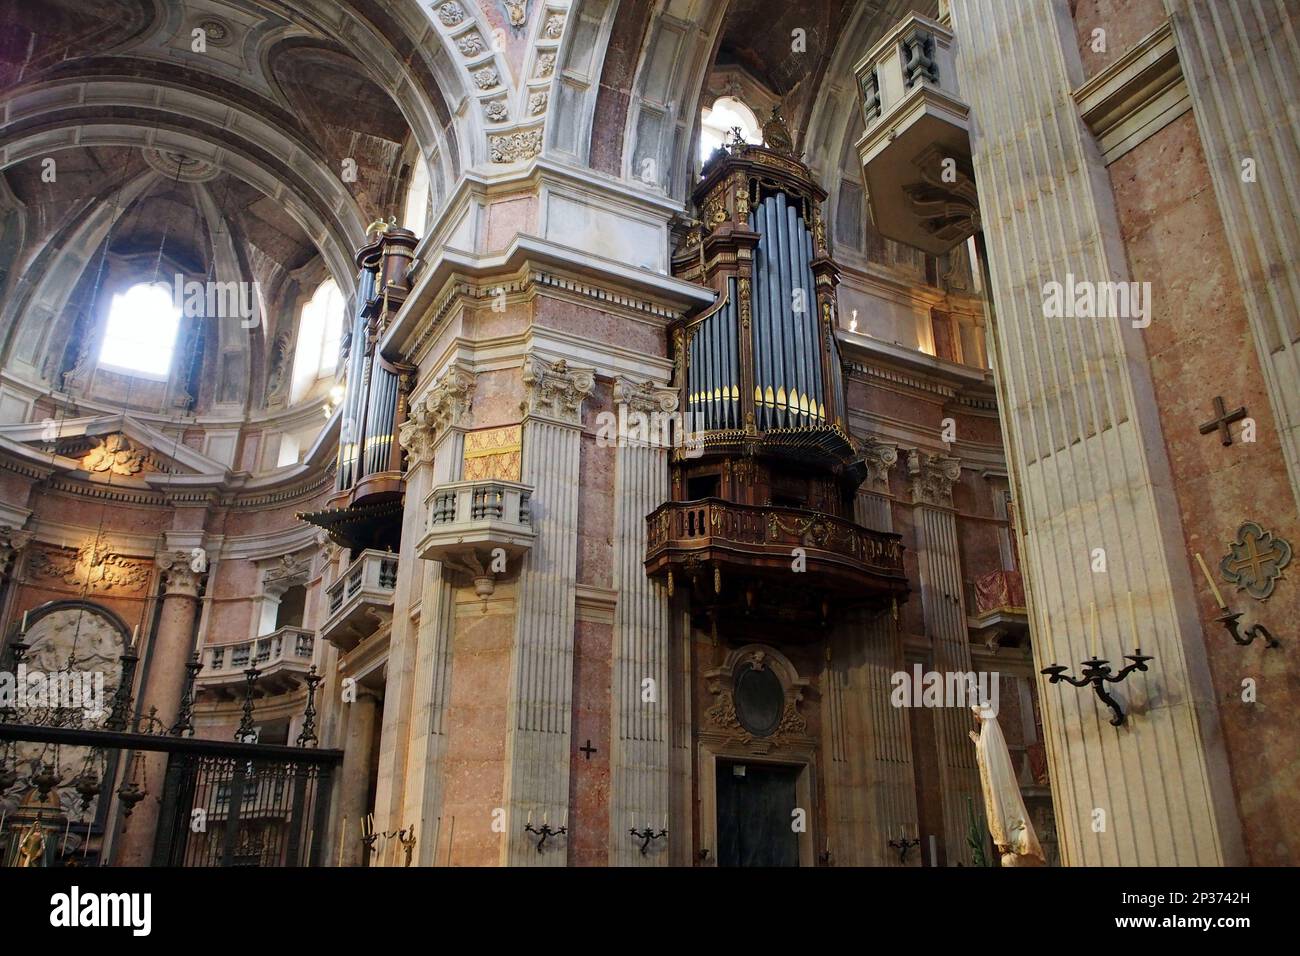 Interior of the Basilica, pipe organ in the side nave, 18th cen. Baroque and Neoclassical styles, Palace-Convent of Mafra, Portugal Stock Photo